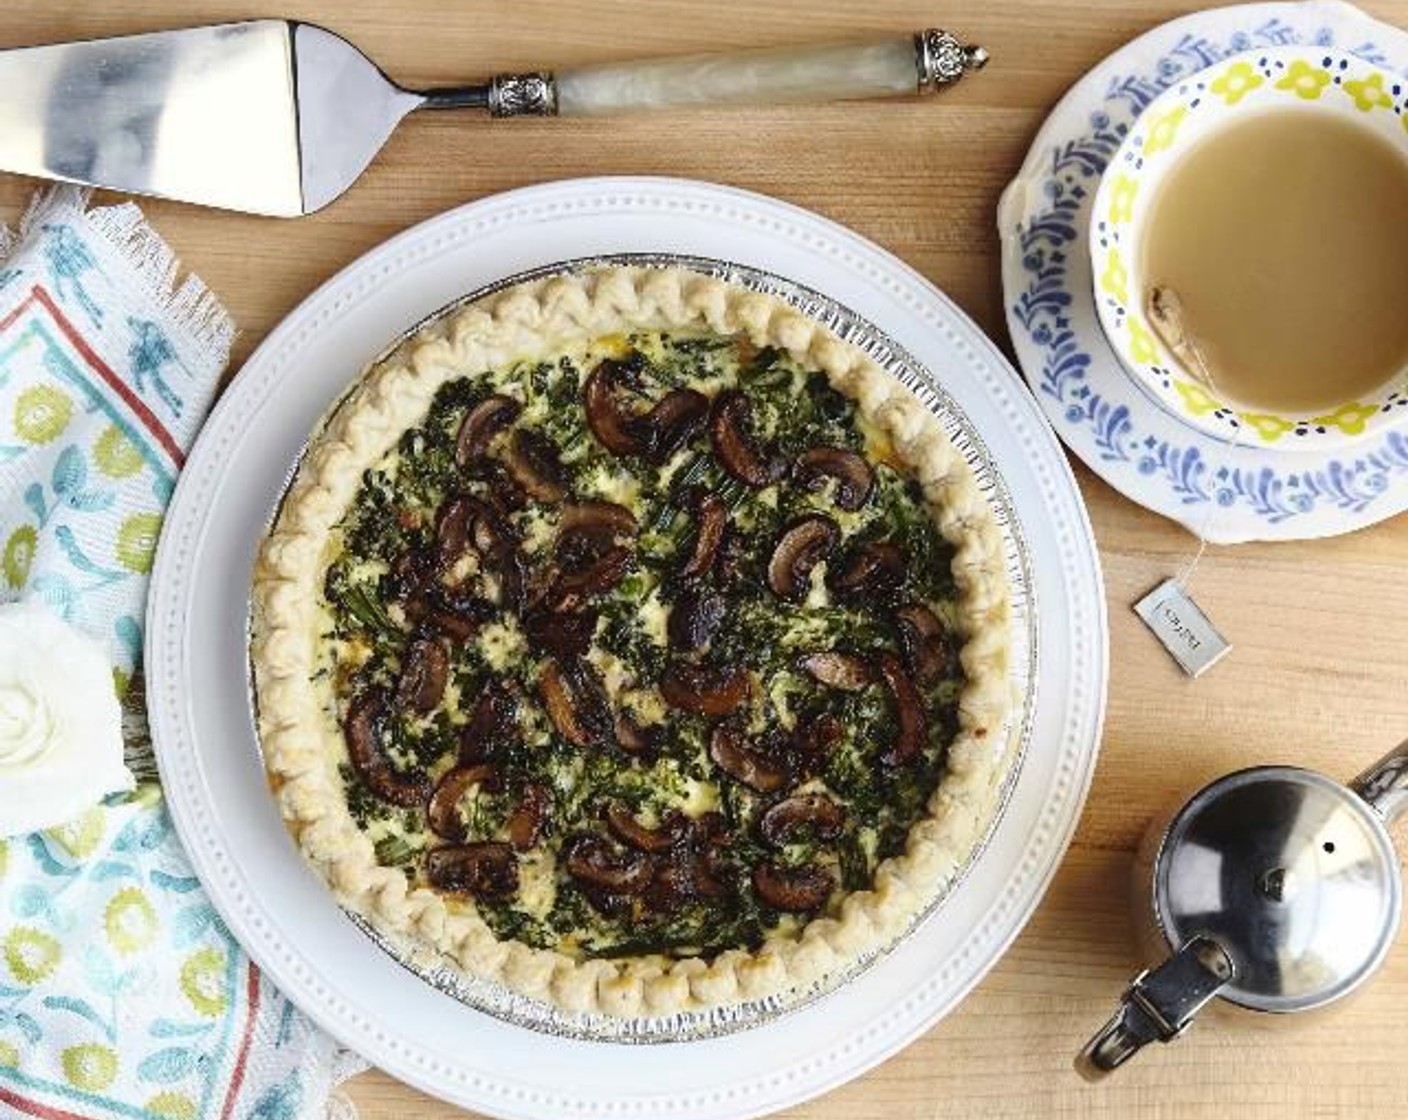 step 16 Slice the mushroom, broccolini and cheese tart into equal sized slices. Serve and enjoy!